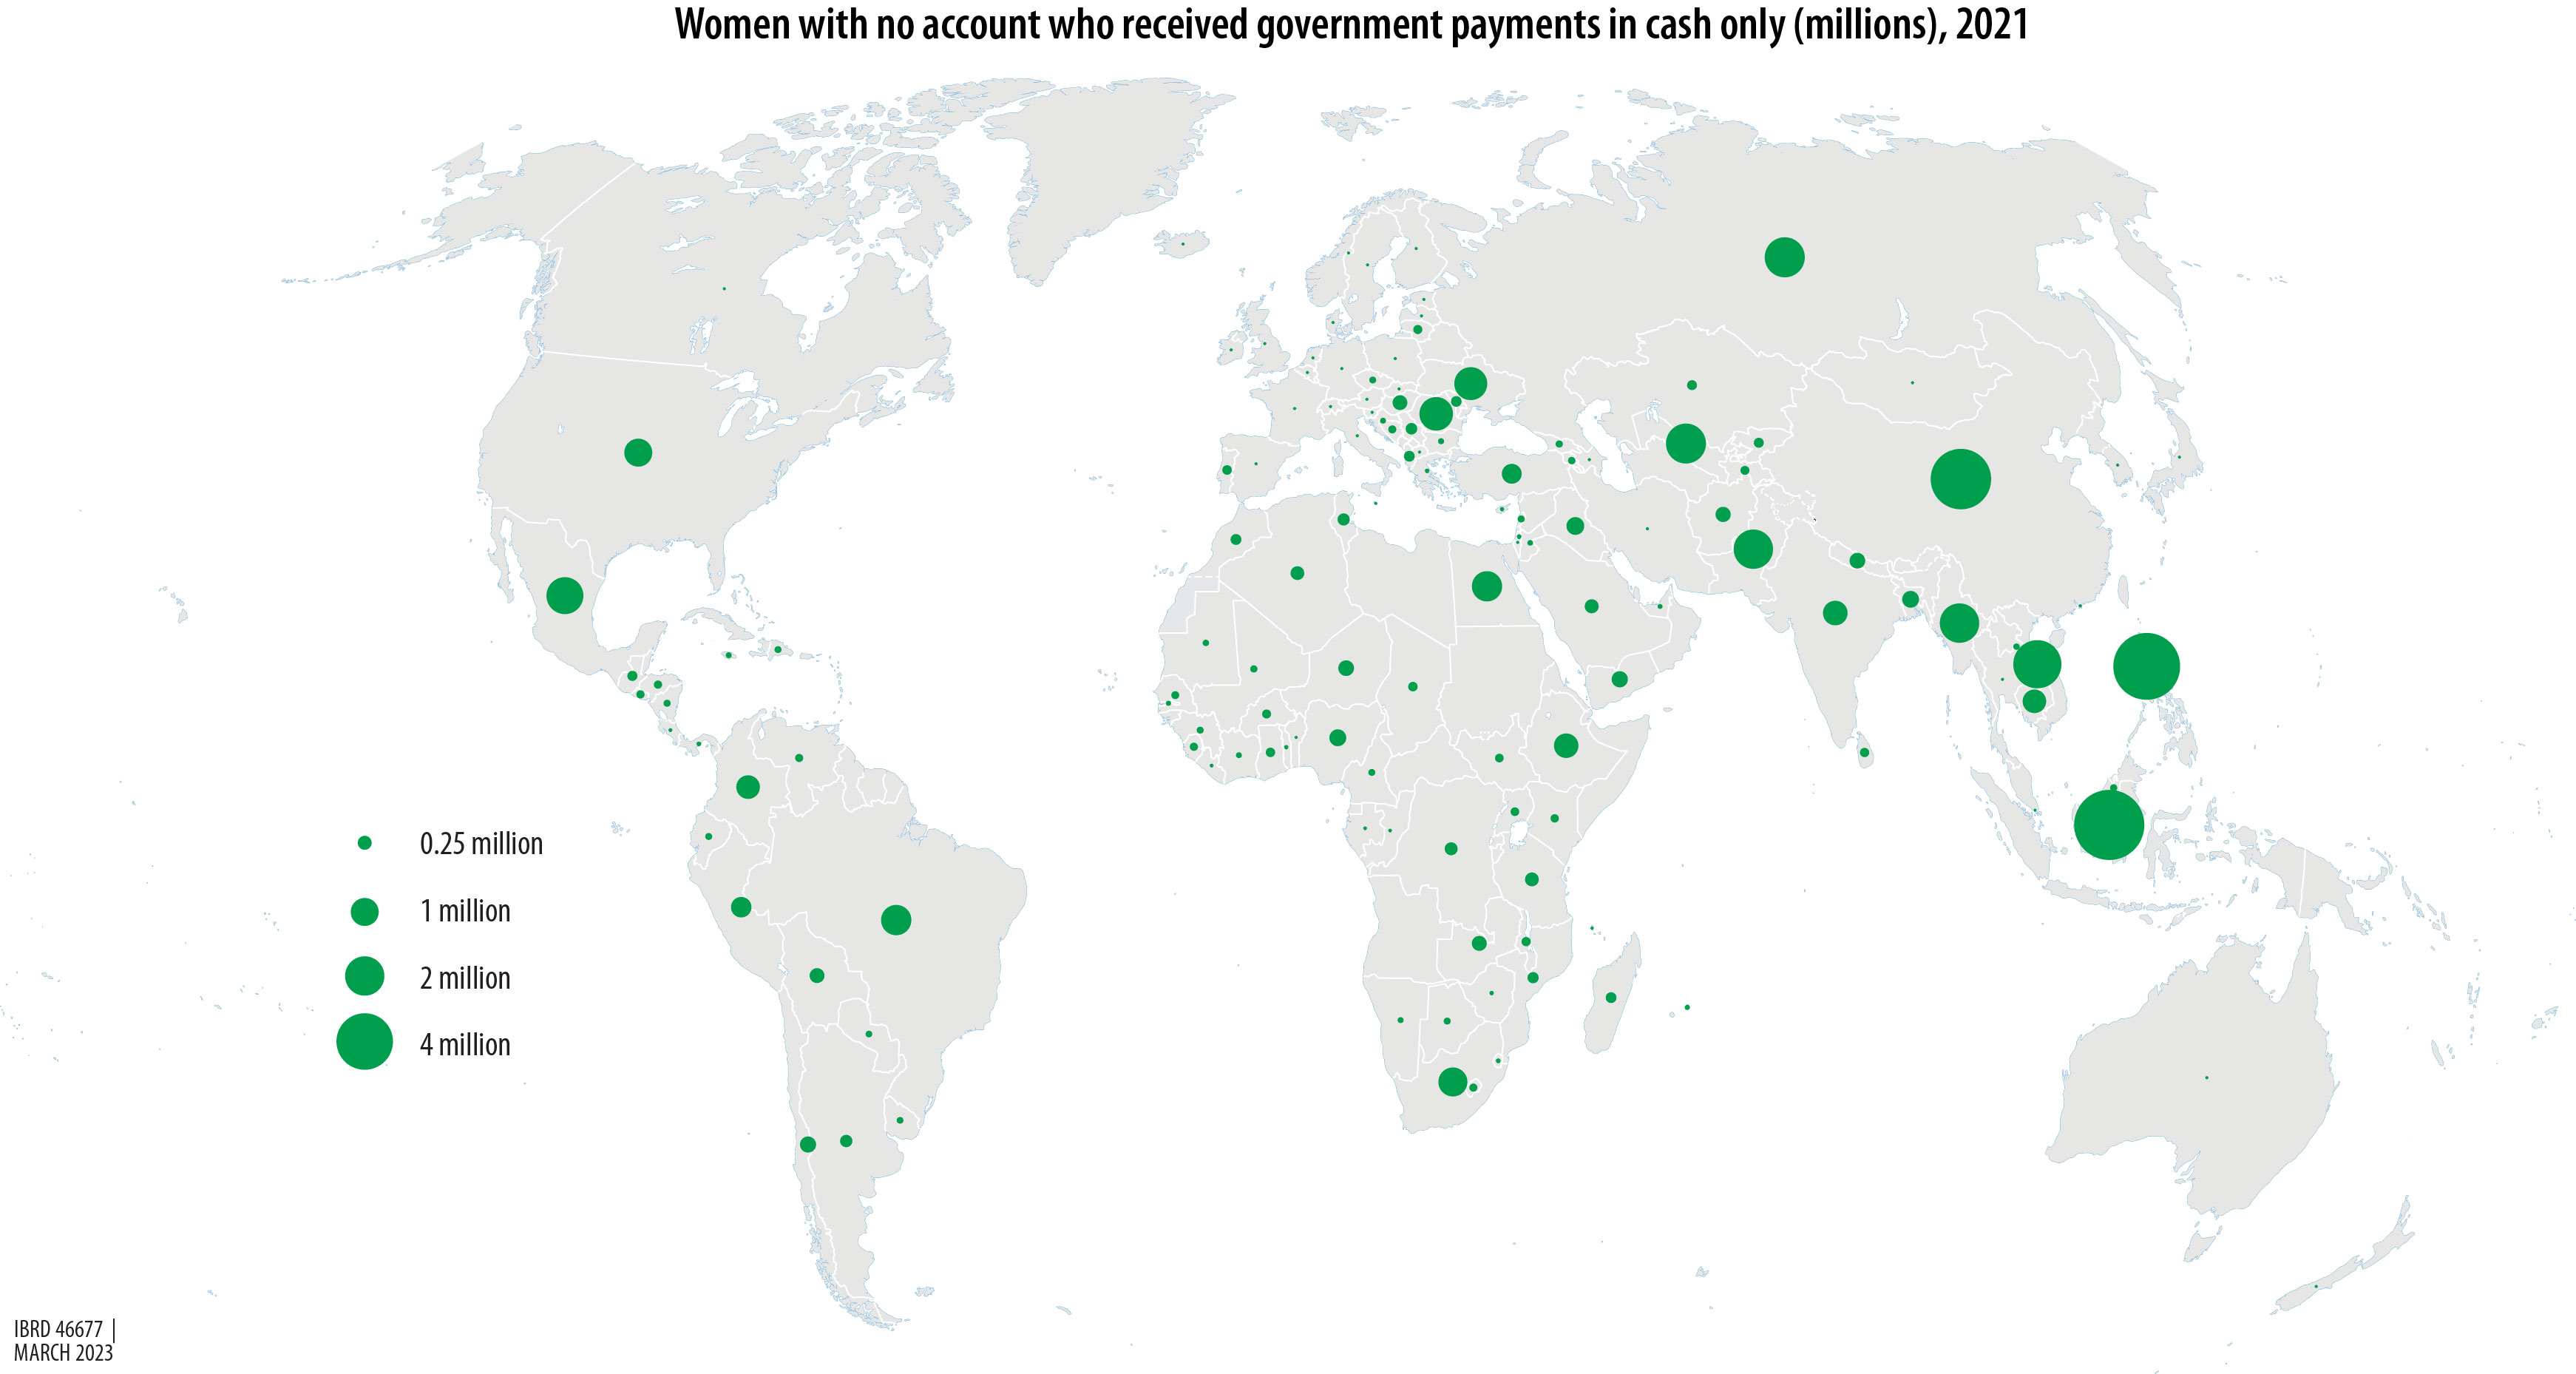 Custom graphic. Map showing women with no account who received government payouts in cash only, in the millions, in 2021.